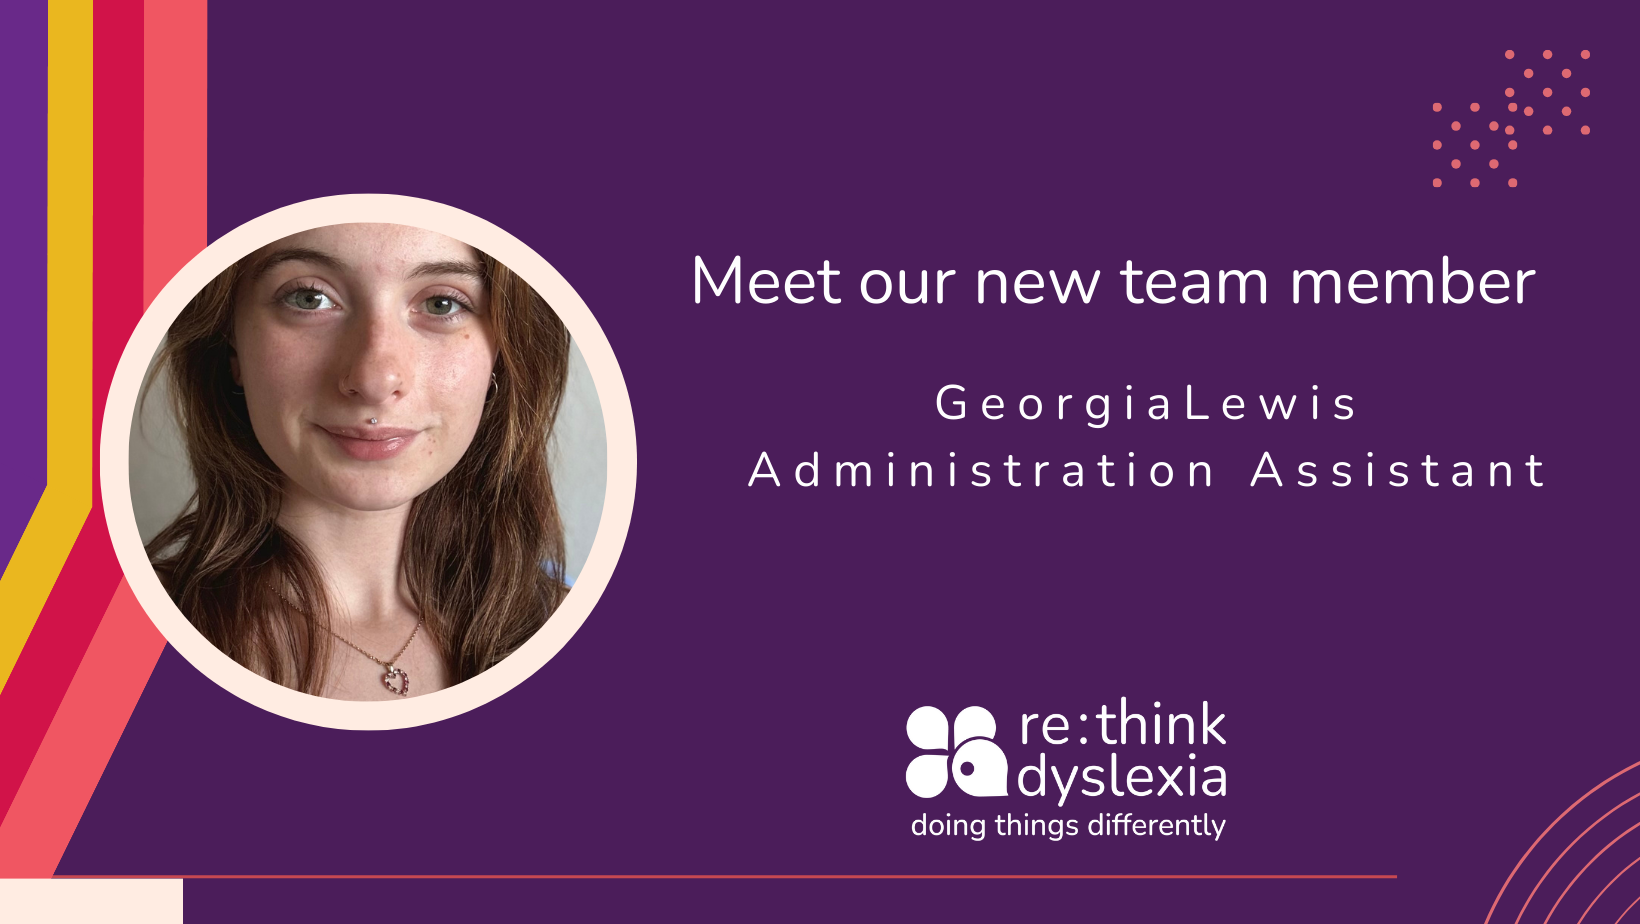 Meet our new team member for re:think dyslexia